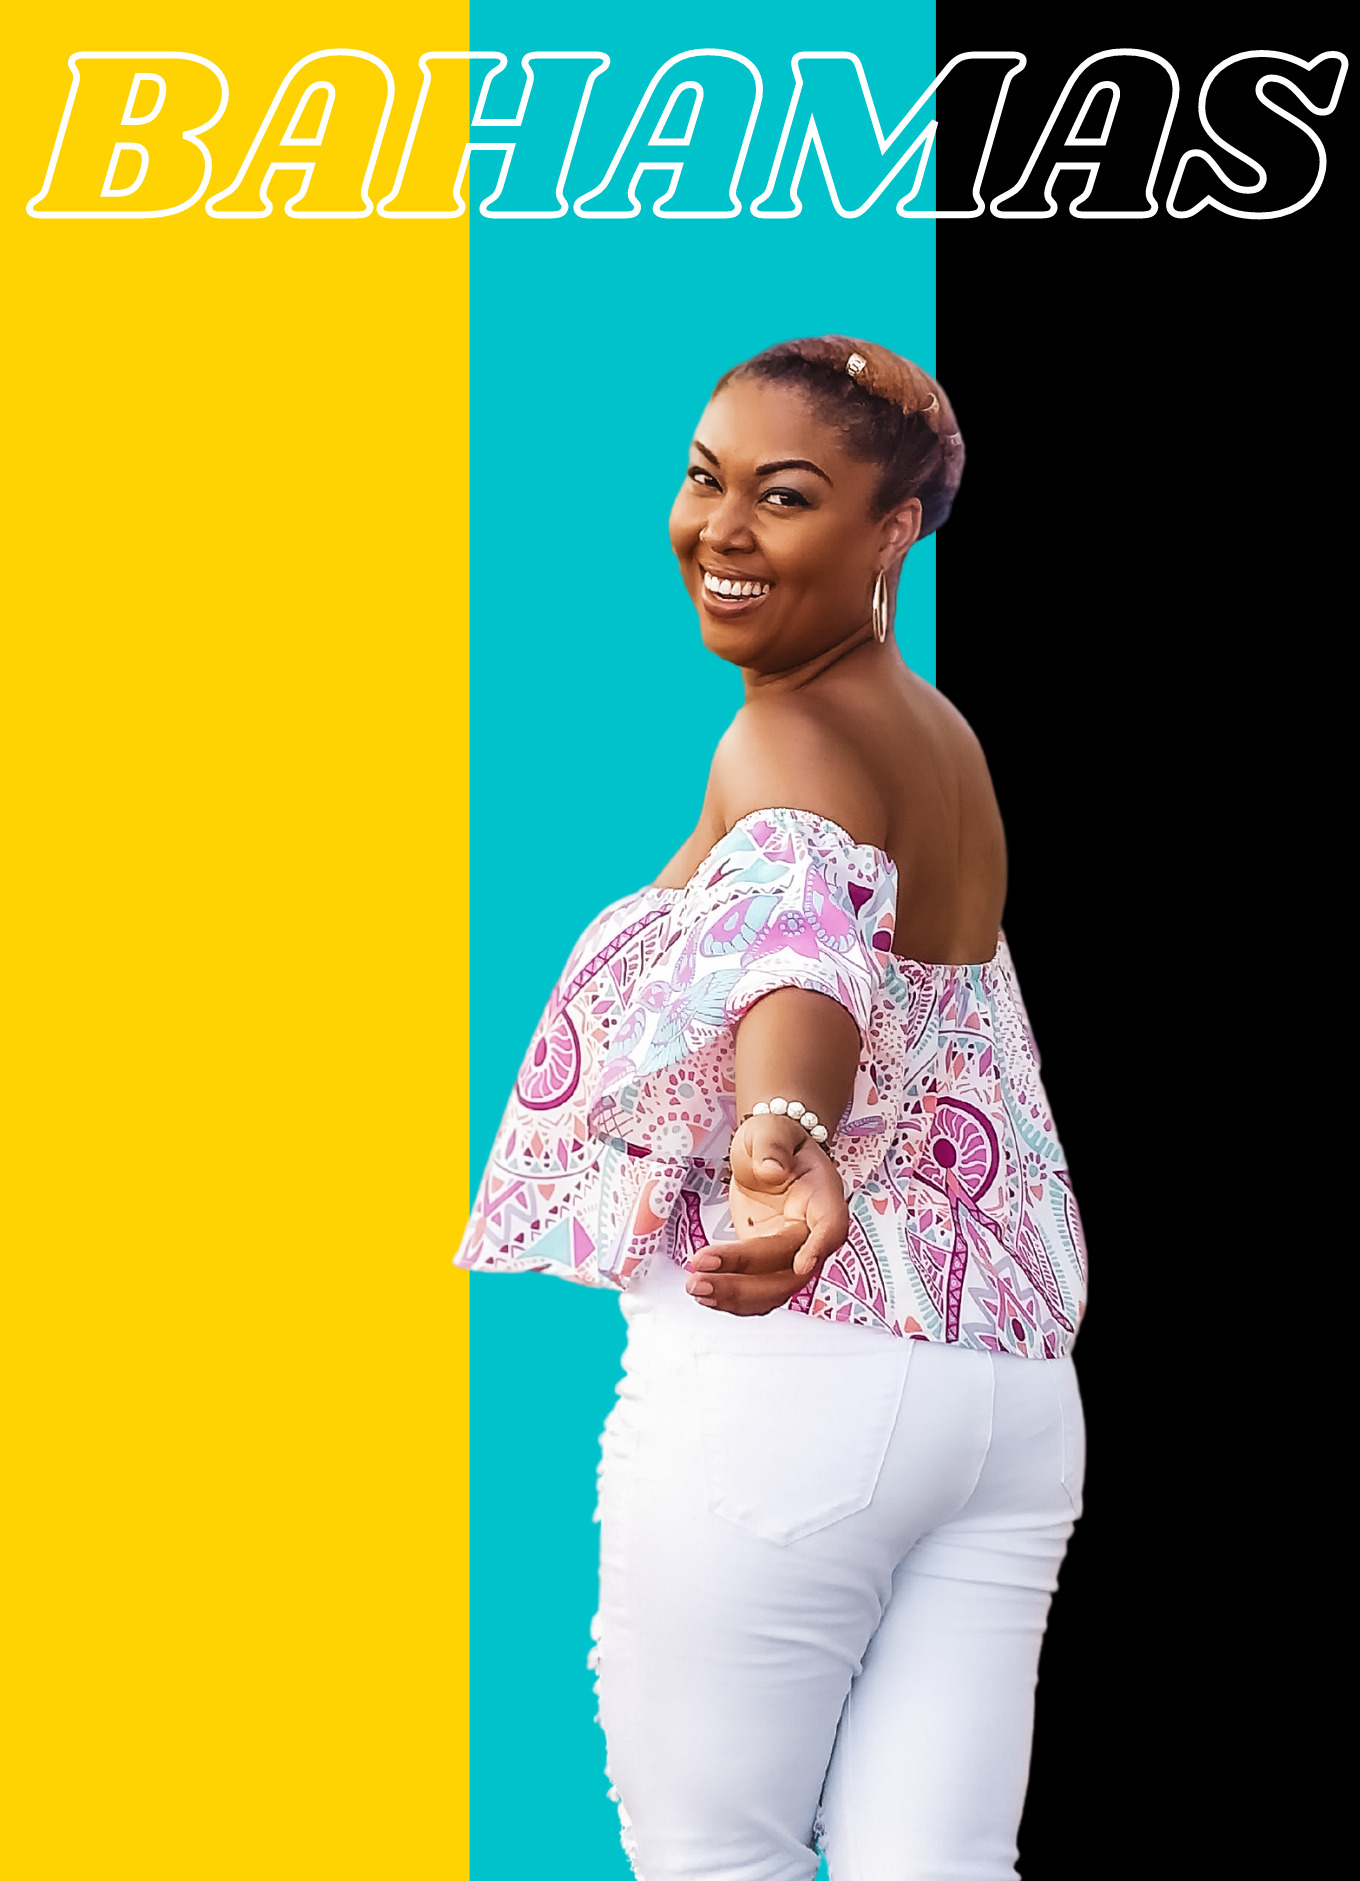 This Bahamian Gyal blogger Rogan Smith poses with the Bahamian flag colours in the back. She smiles into the camera